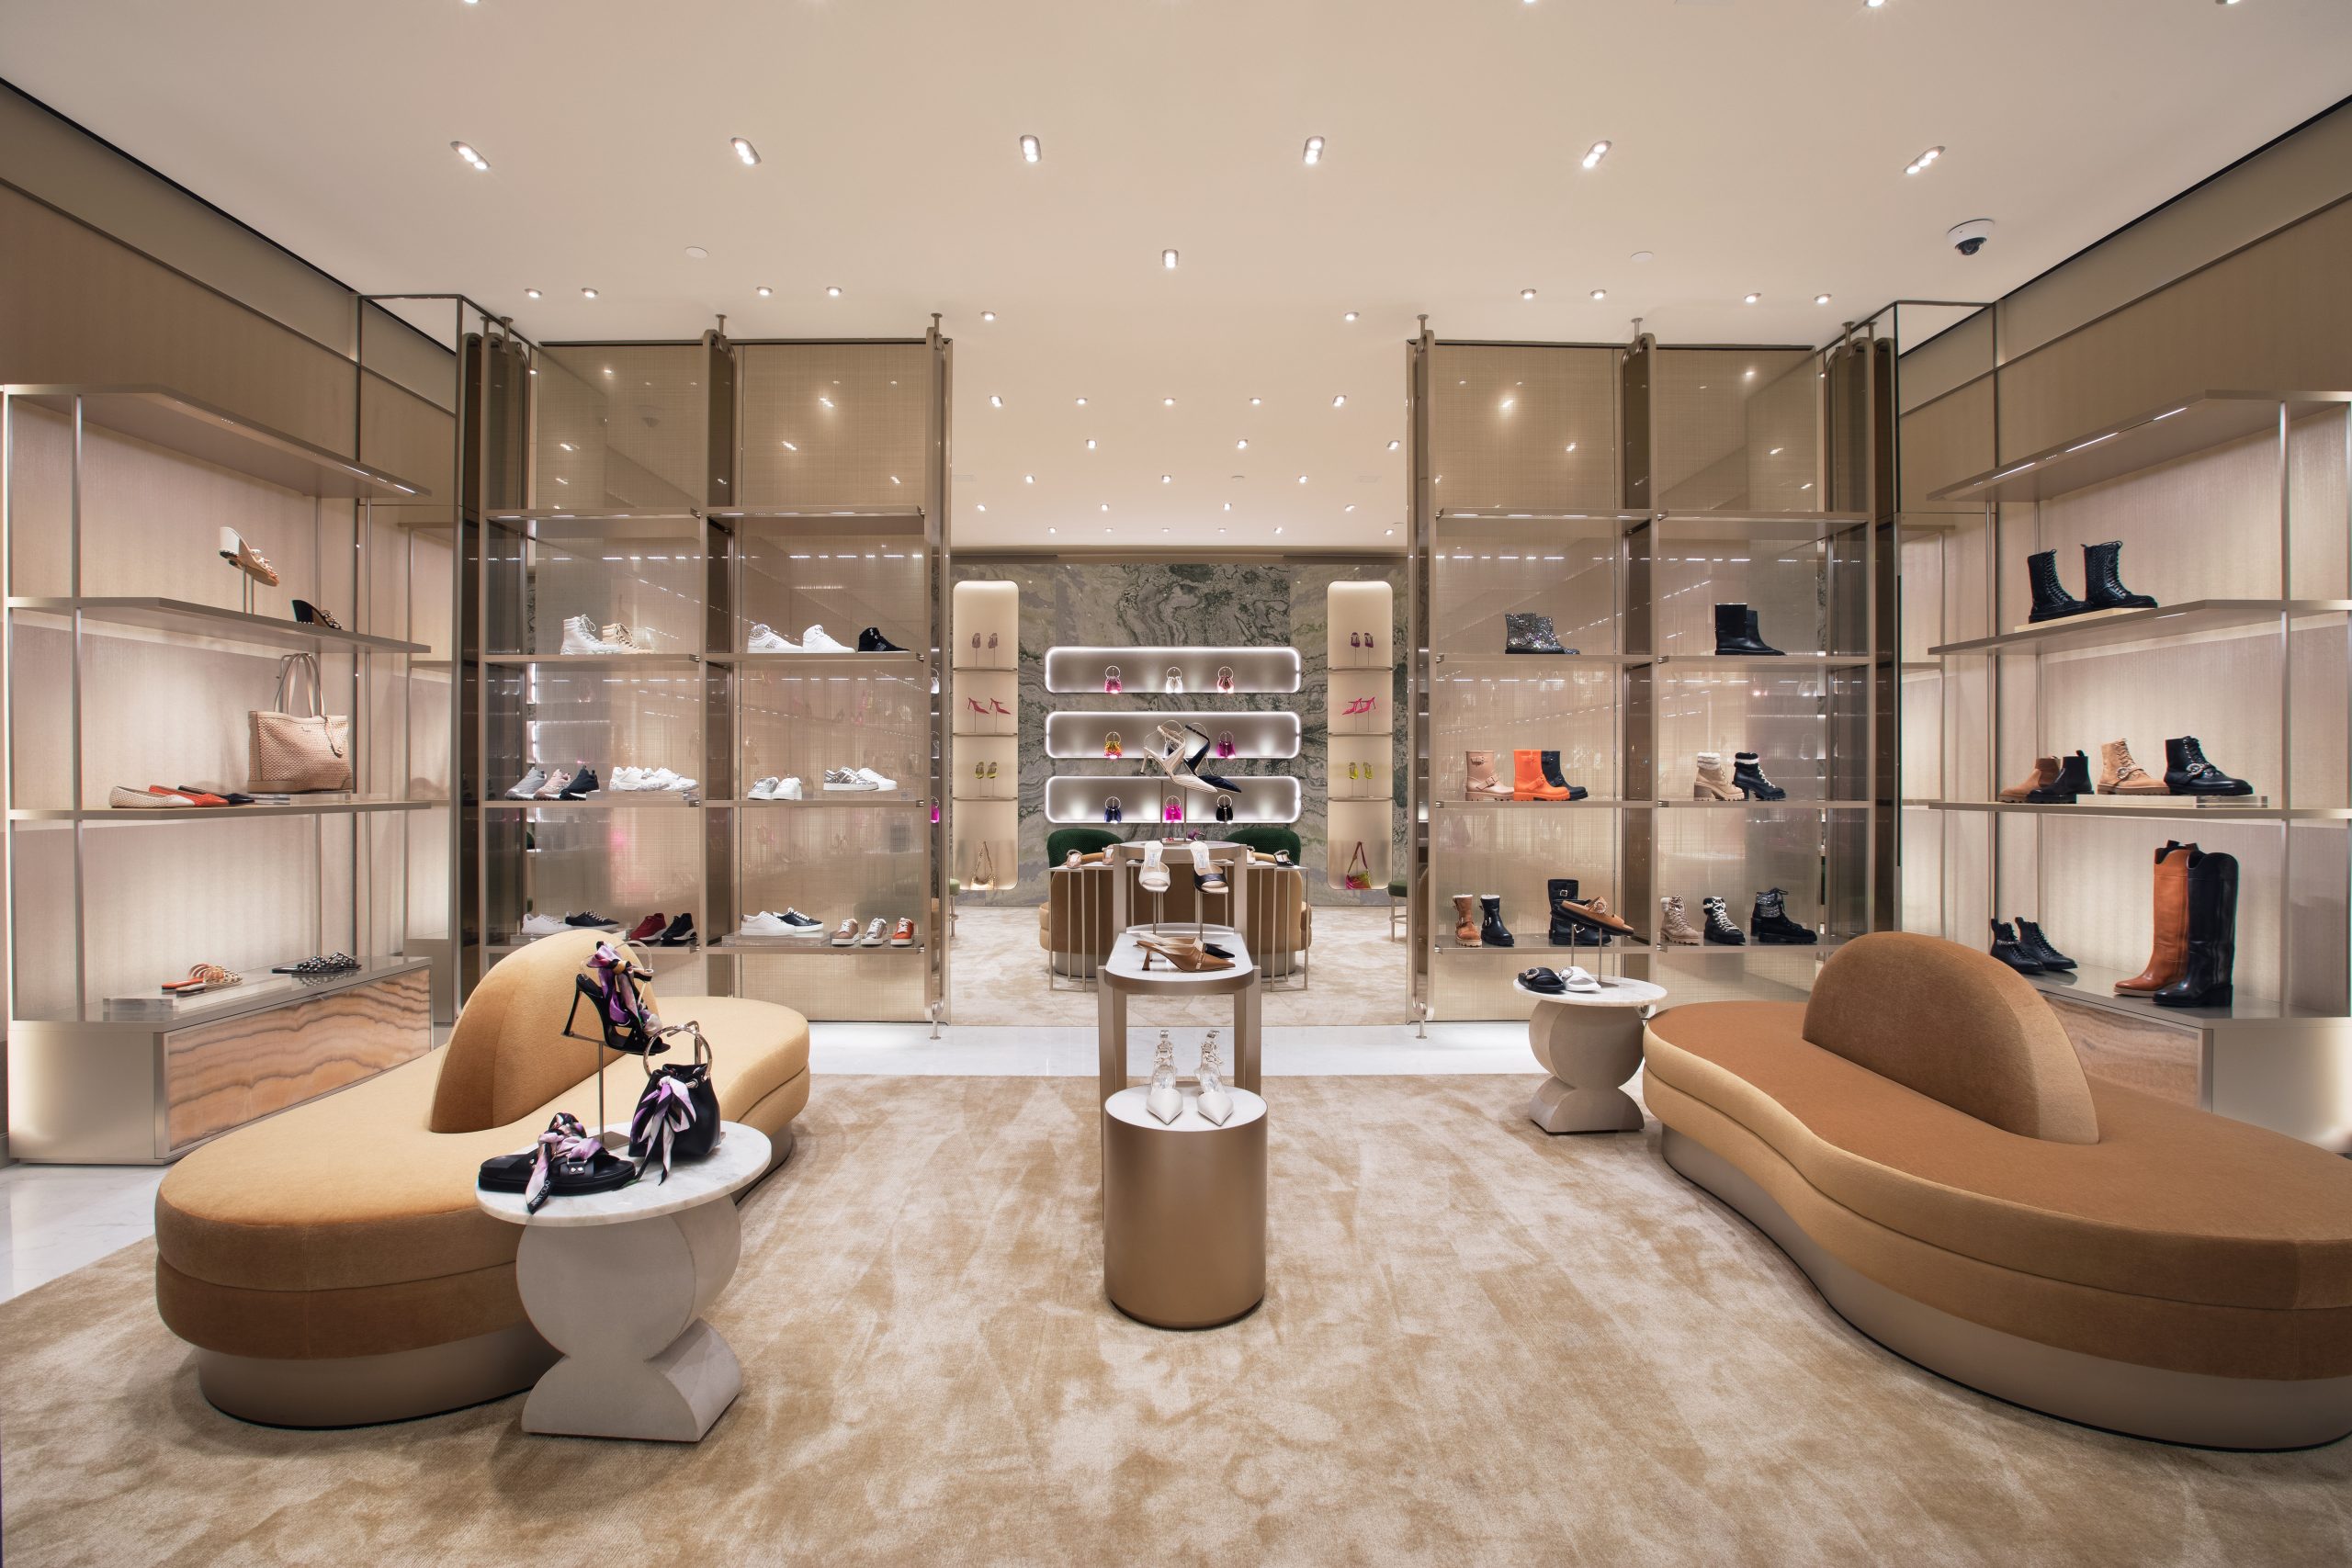 Jimmy Choo, MCM, COS open at Aventura Mall - South Florida Business Journal